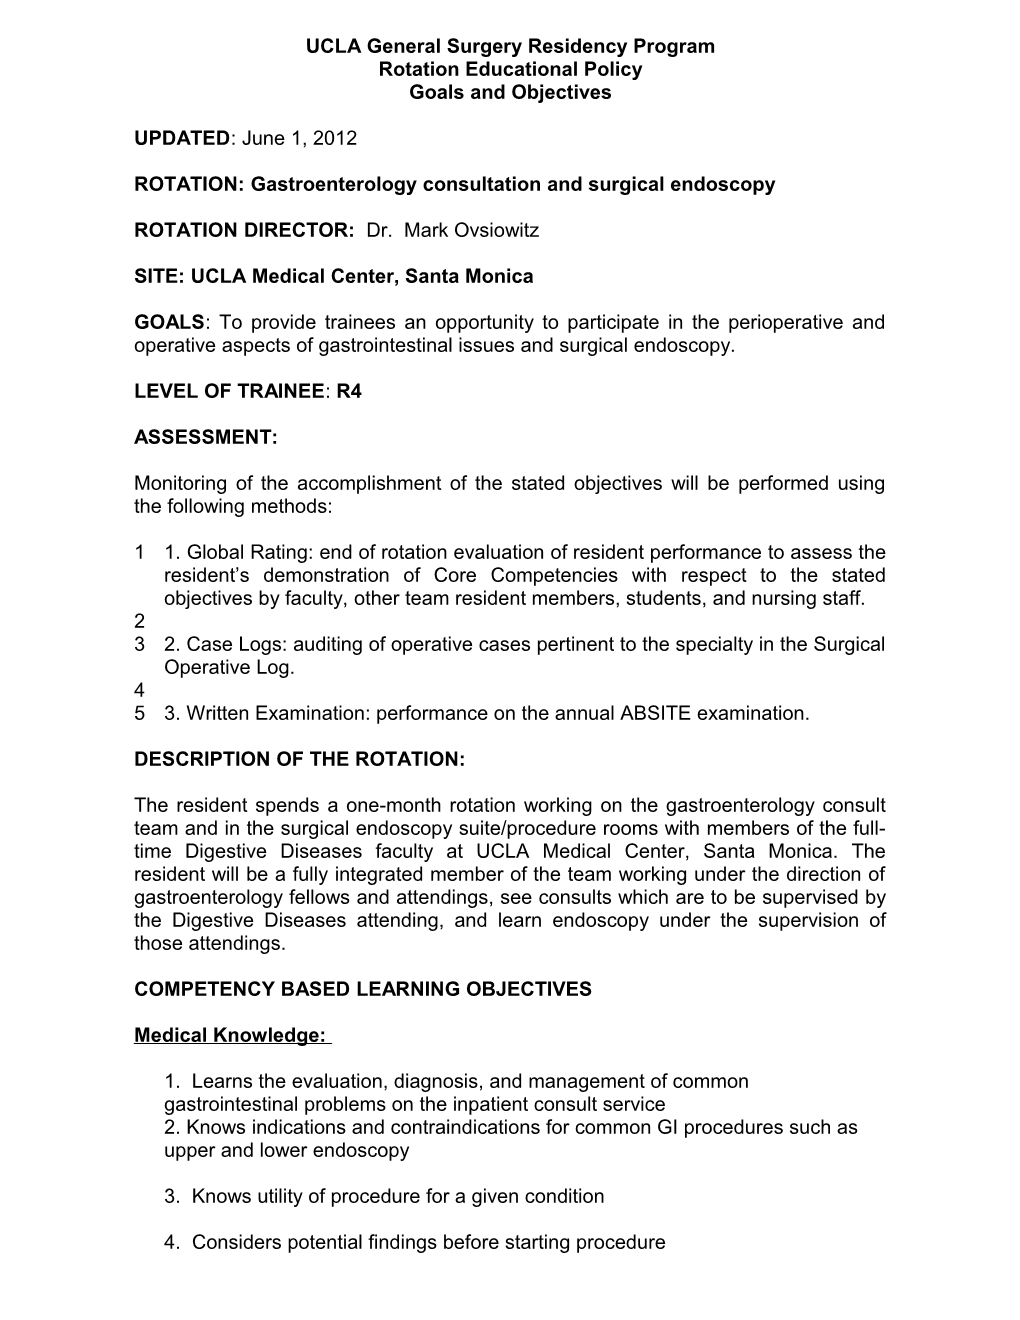 UCLA General Surgery Residency Program Rotation Educational Policy Goals and Objectives